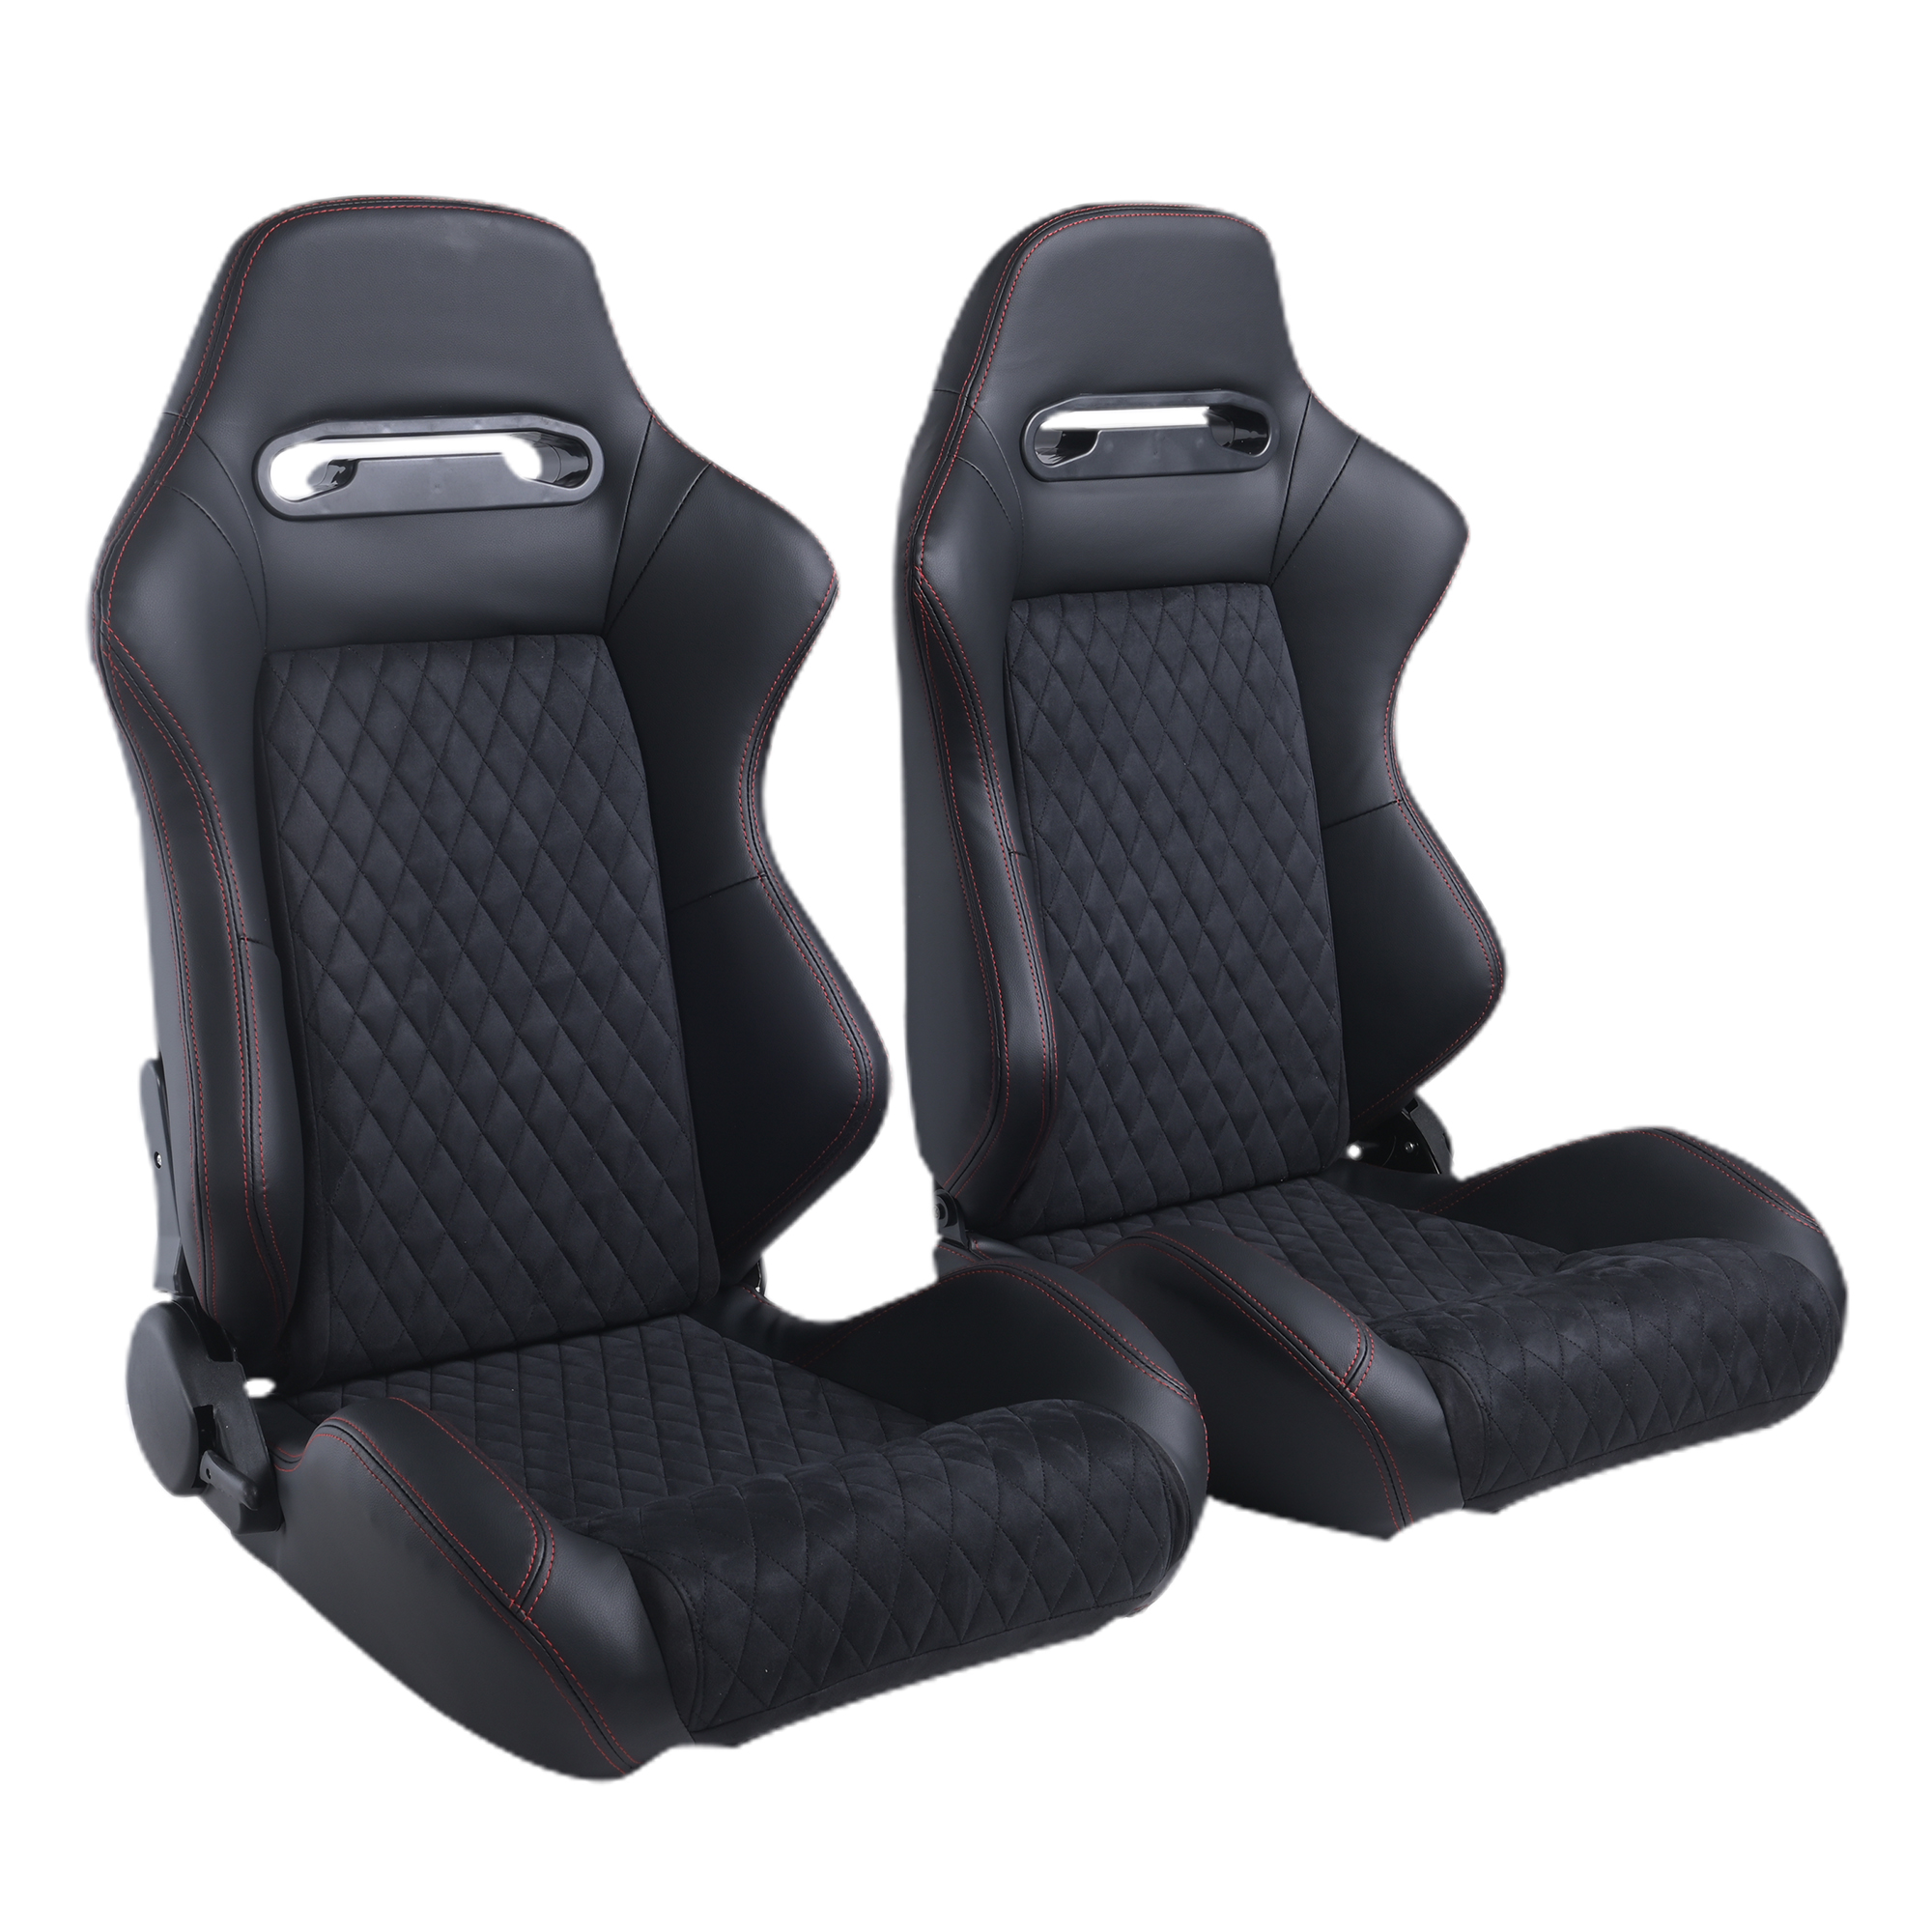 RACING SEAT HIGH QUALITY PVC WITH SUADE MATERIAL DOUBLE SLIDER  2PCS-CASAINC